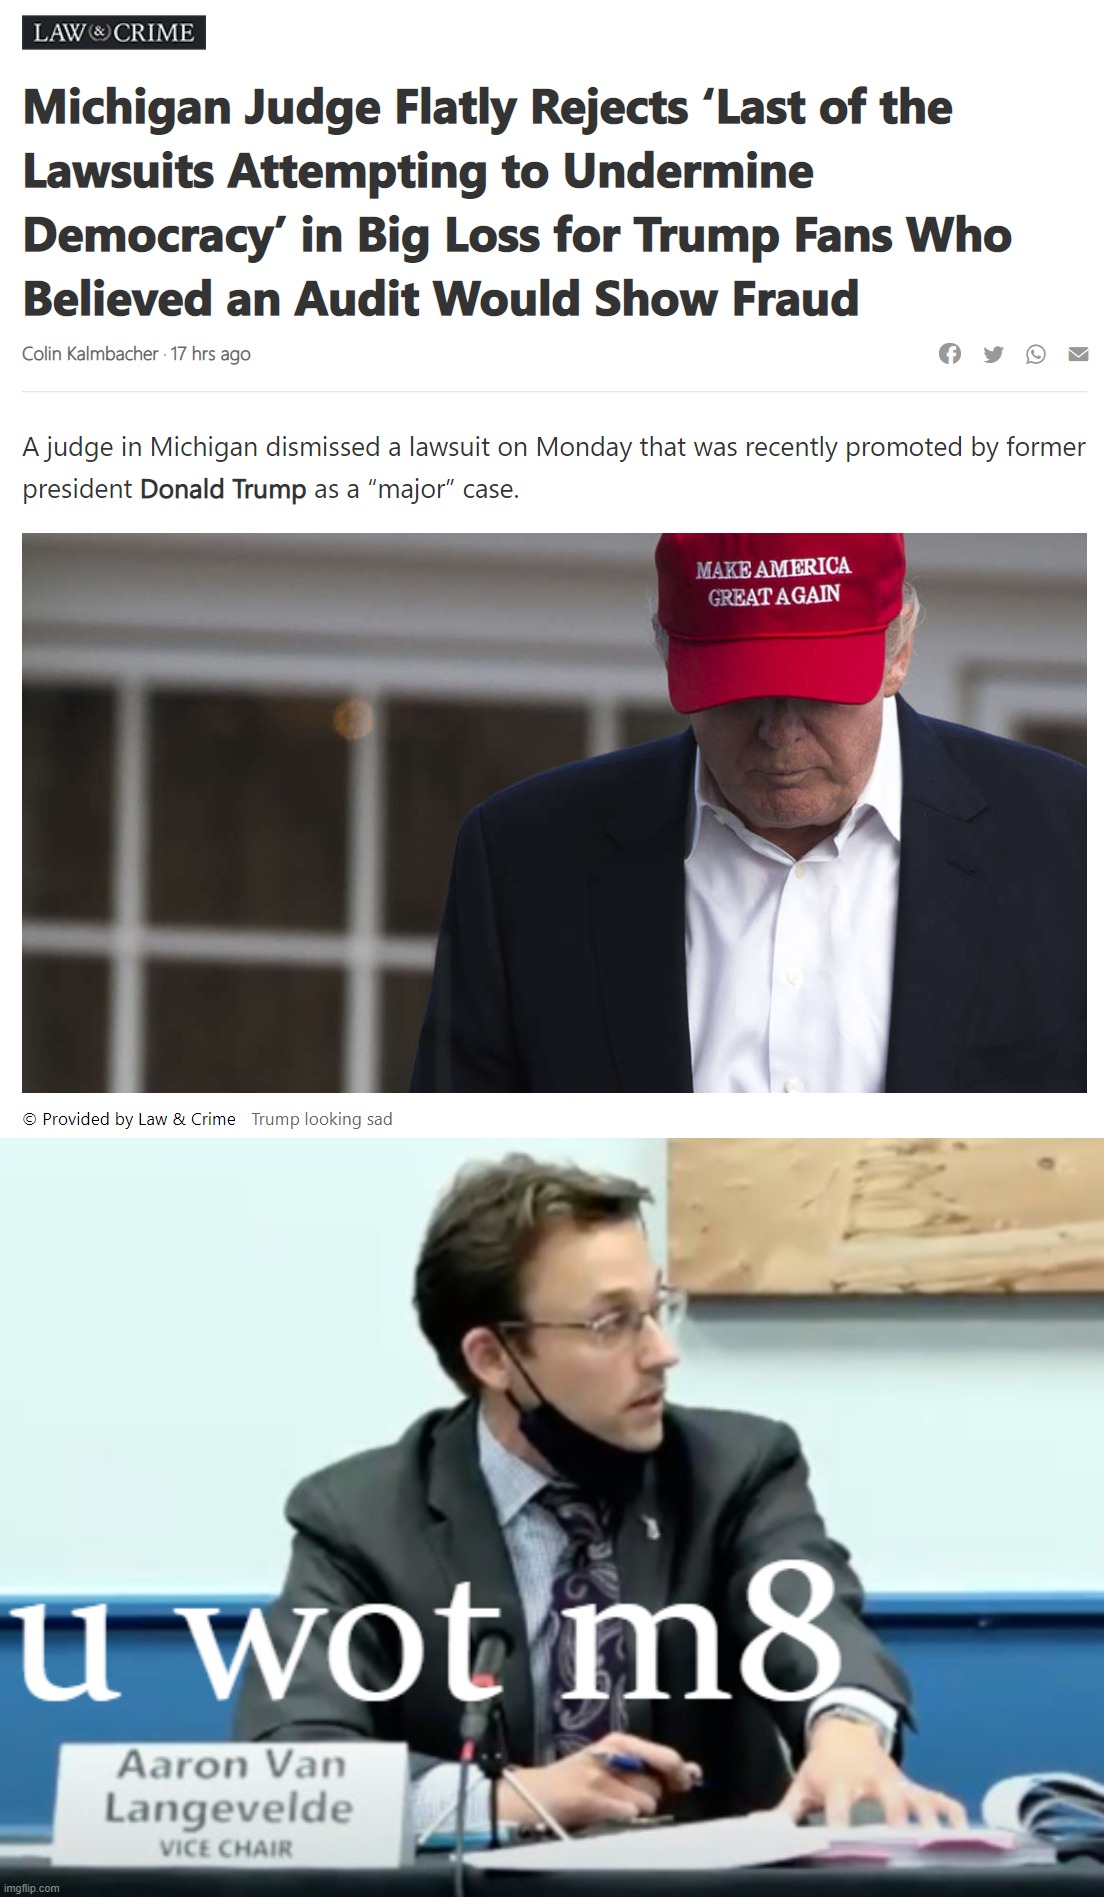 hey, guys! Trump lost again! | image tagged in michigan judge rejects trump lawsuit,aaron van langevelde u wot m8,election 2020,2020 elections,lawsuit,trump is a moron | made w/ Imgflip meme maker